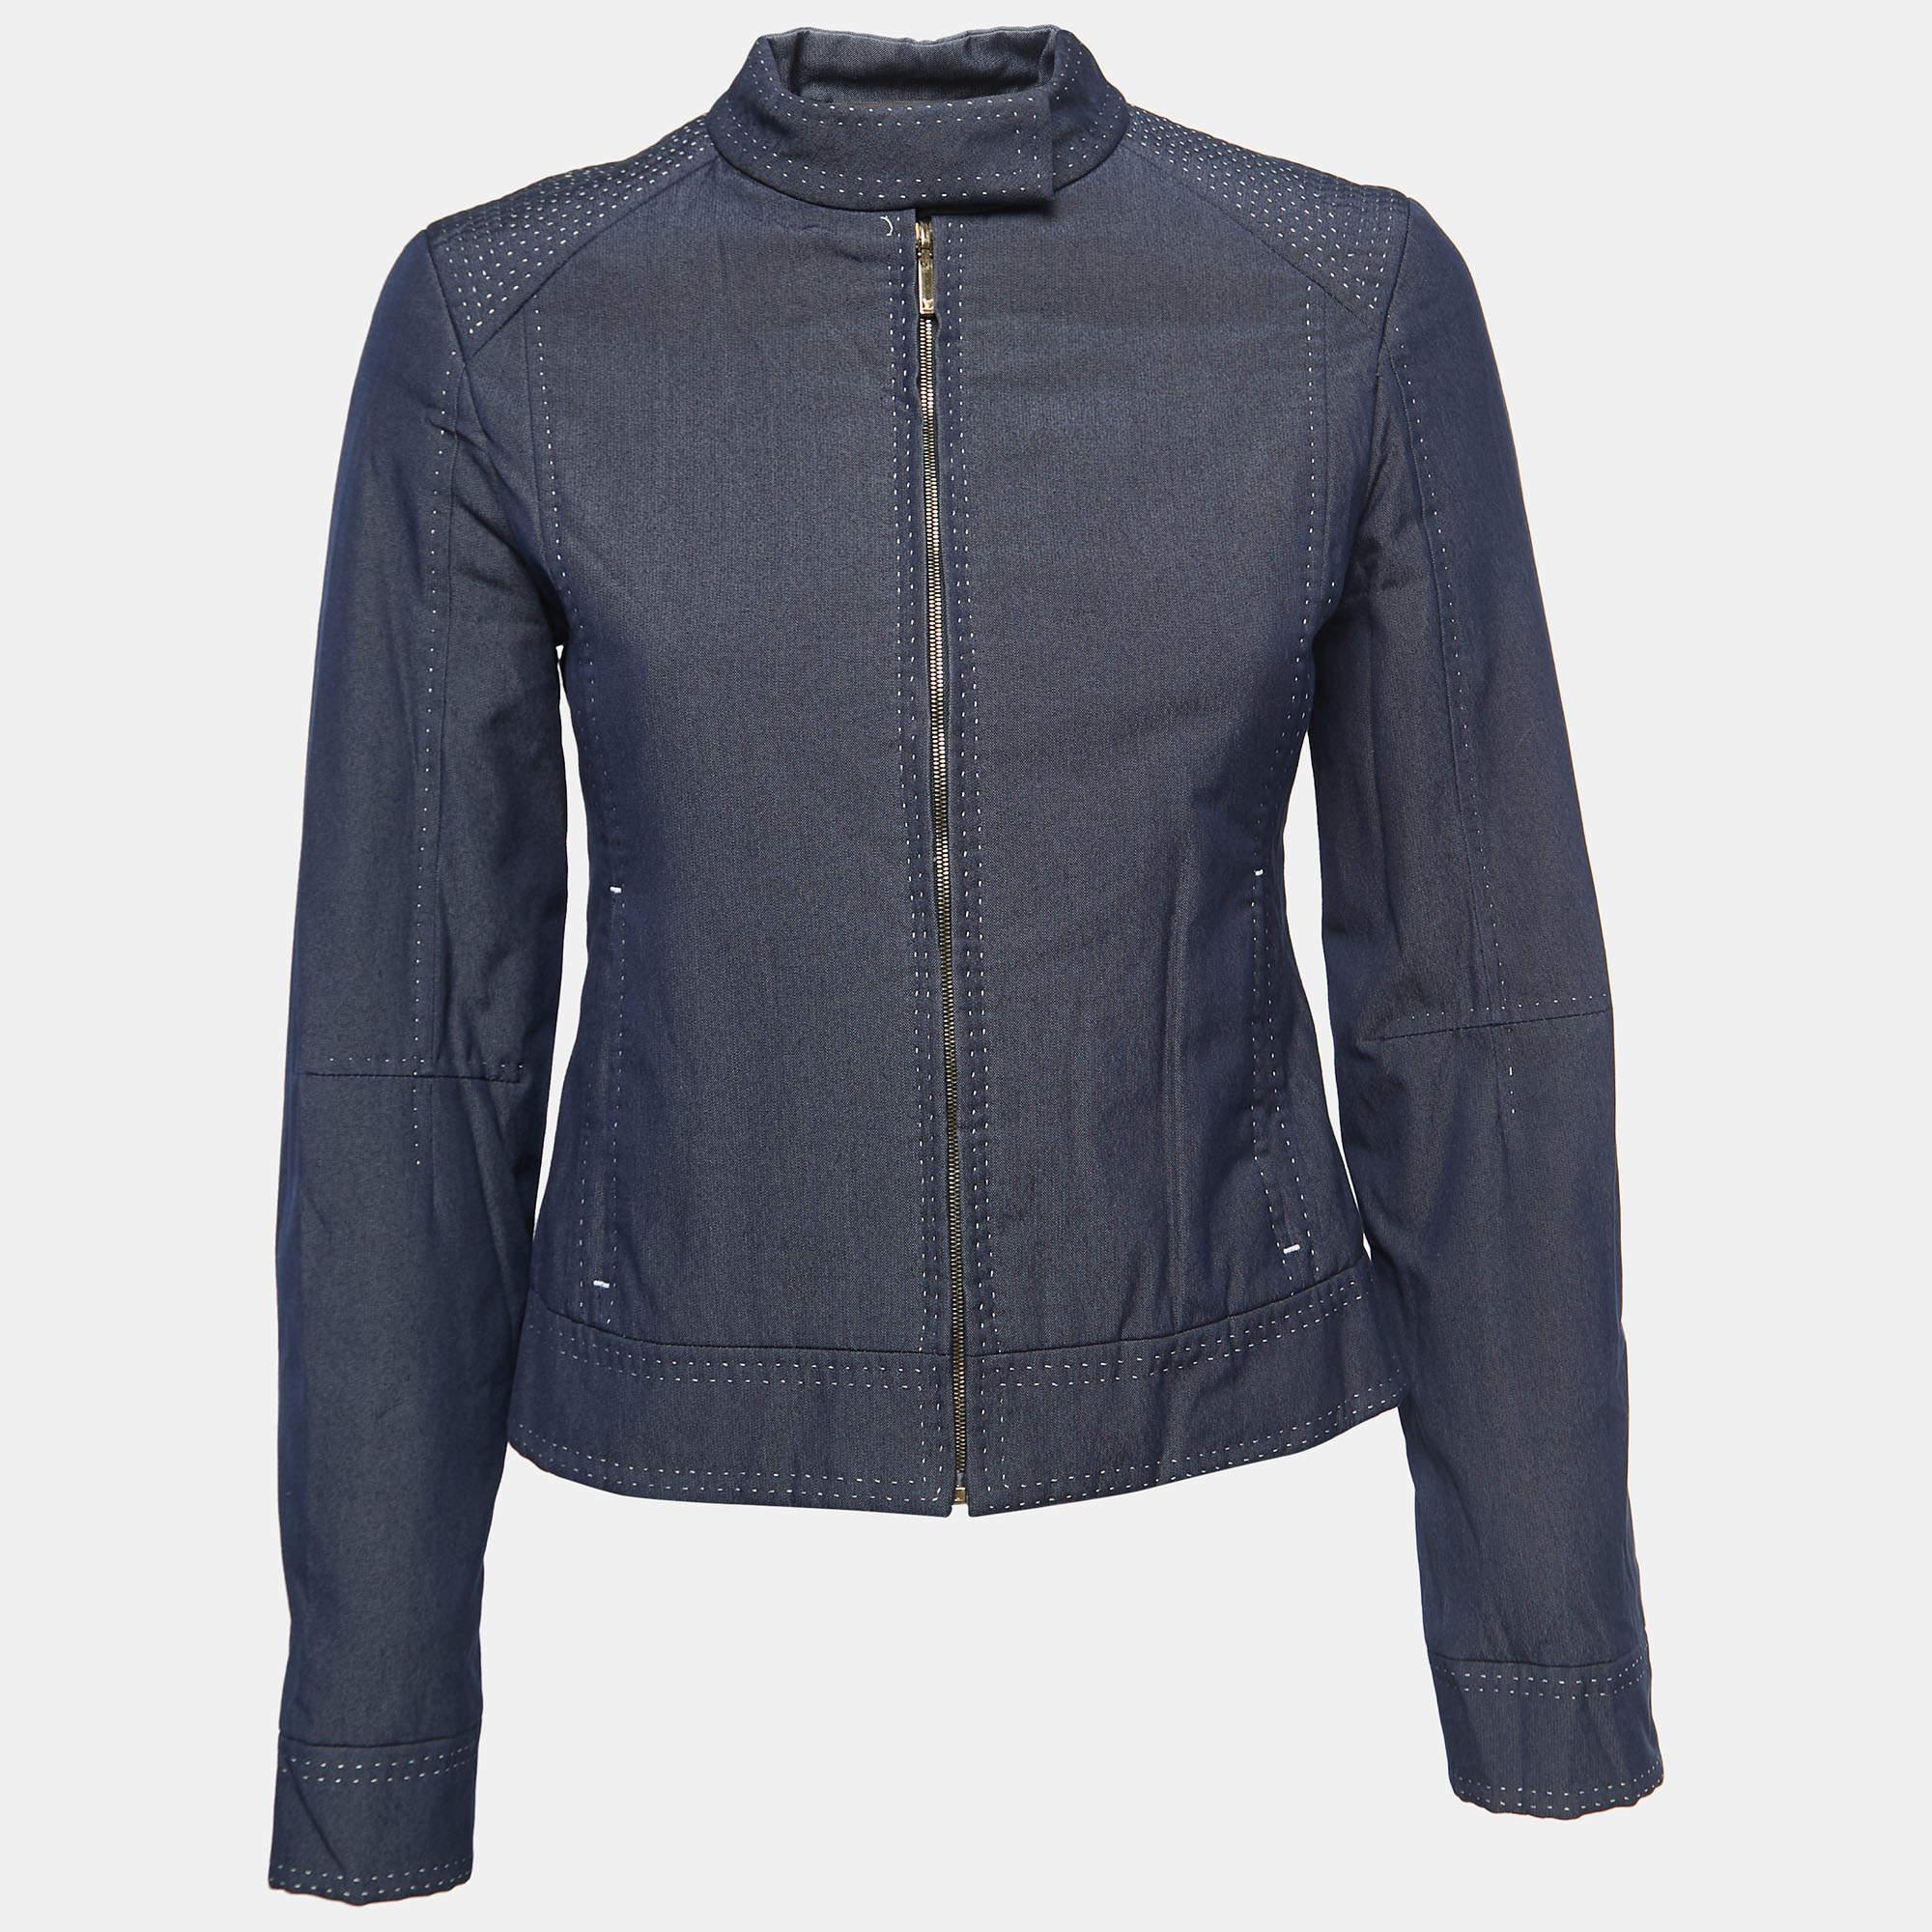 The Louis Vuitton jacket is a stylish and sophisticated outerwear piece. Crafted from premium chambray fabric, it features a sleek zip-front closure, creating a contemporary look. The jacket's elegant design is complemented by the iconic Louis